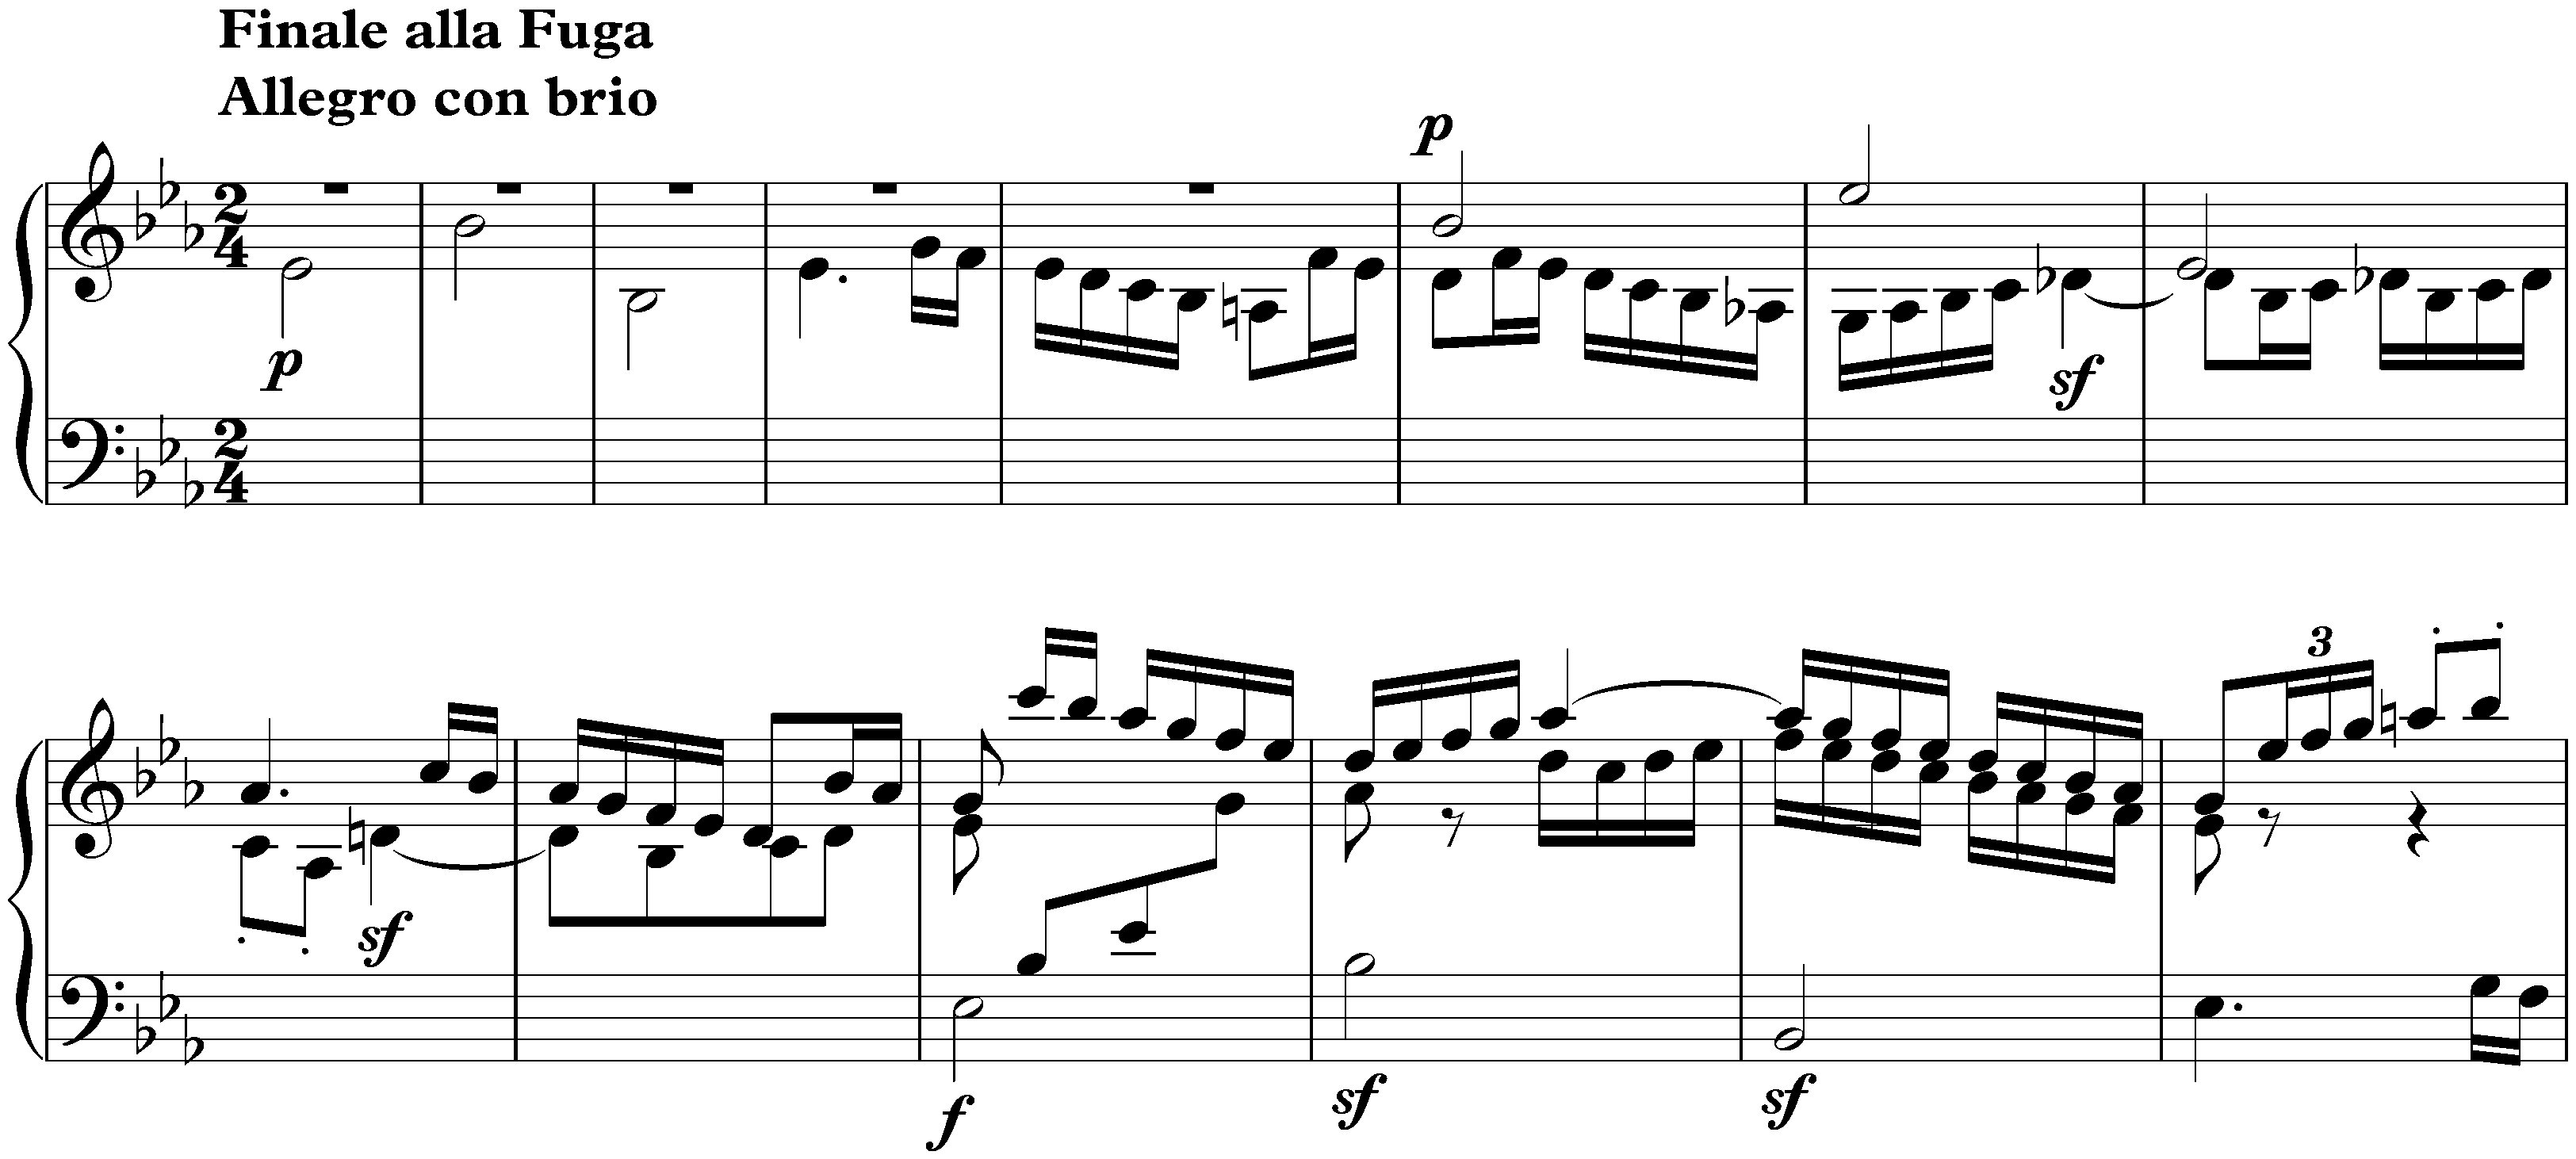 Variations and Fugue in E-flat major, op. 35